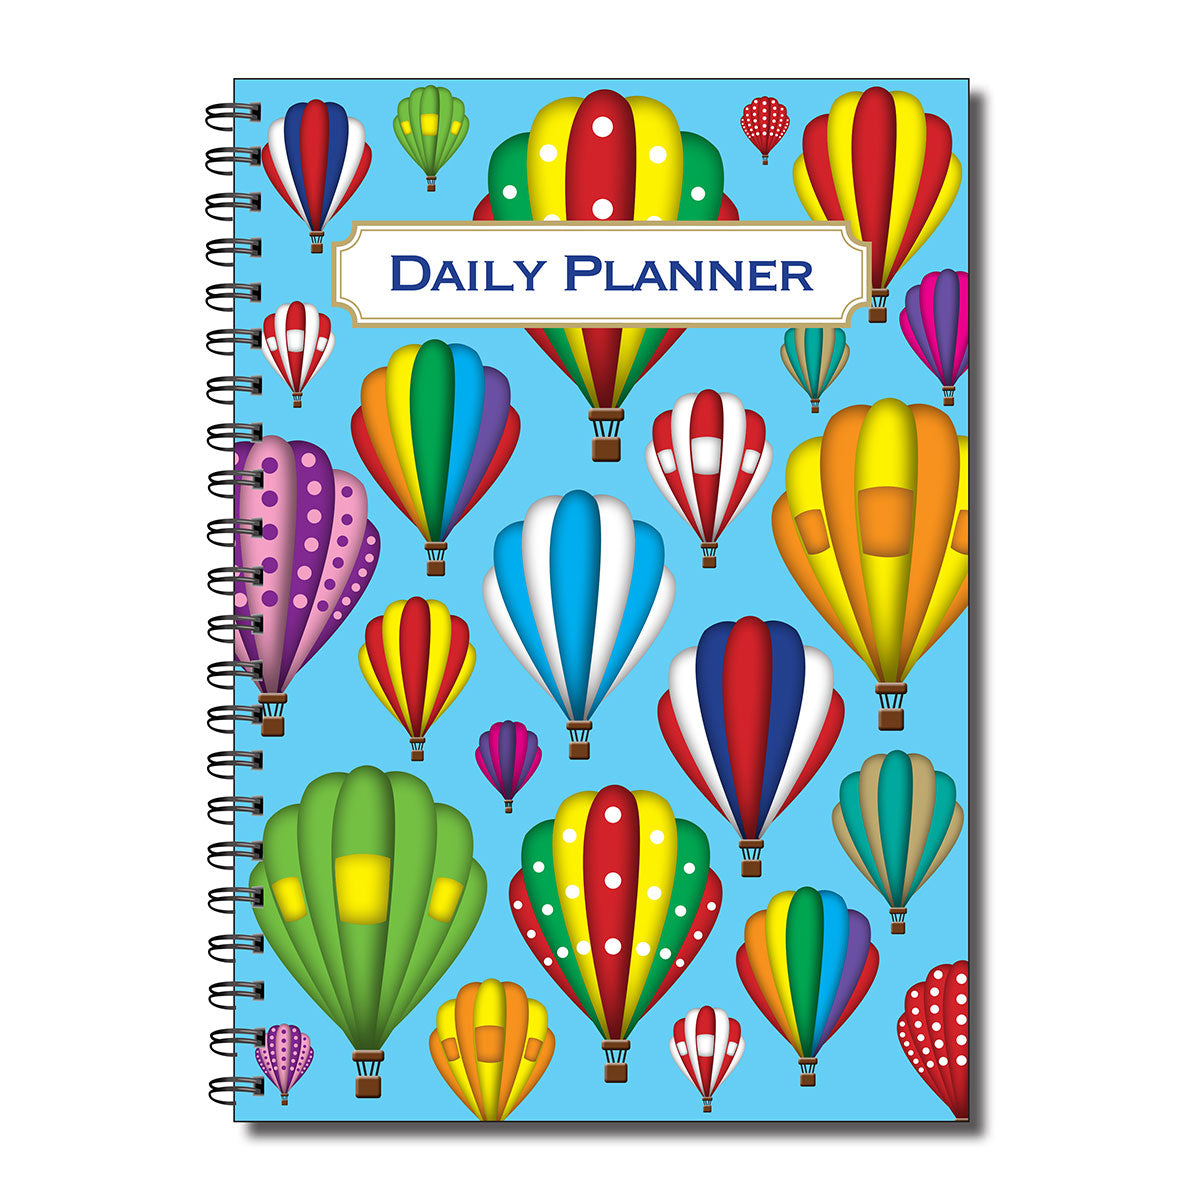 Designer Range Daily Planner A5 120gsm 50 double sided pages Wirobound